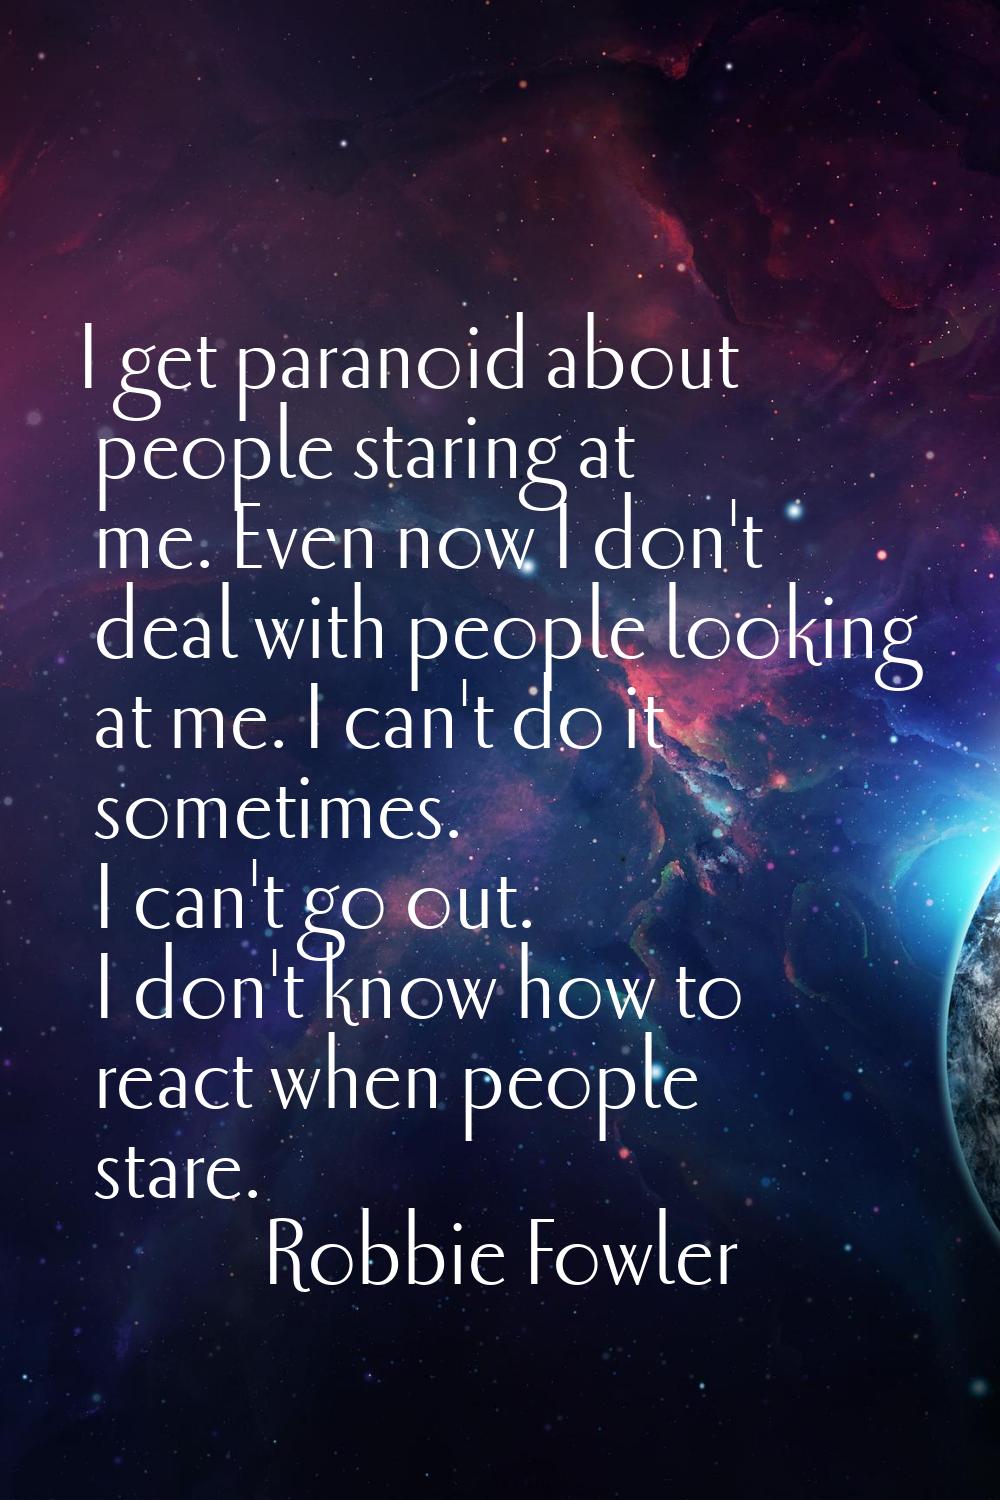 I get paranoid about people staring at me. Even now I don't deal with people looking at me. I can't